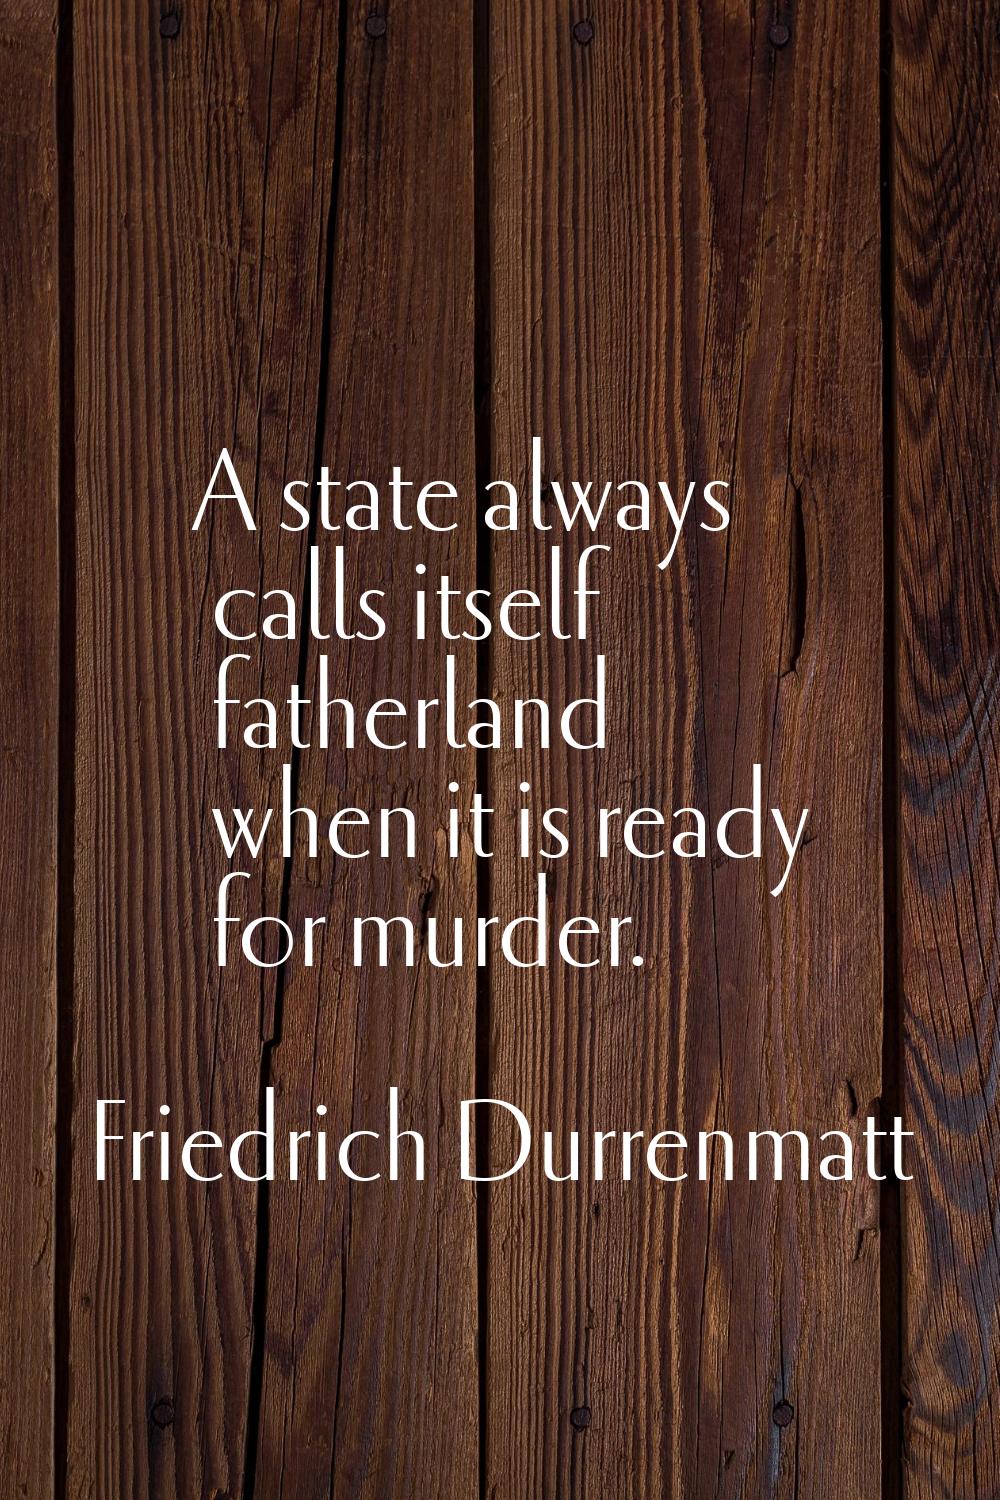 A state always calls itself fatherland when it is ready for murder.